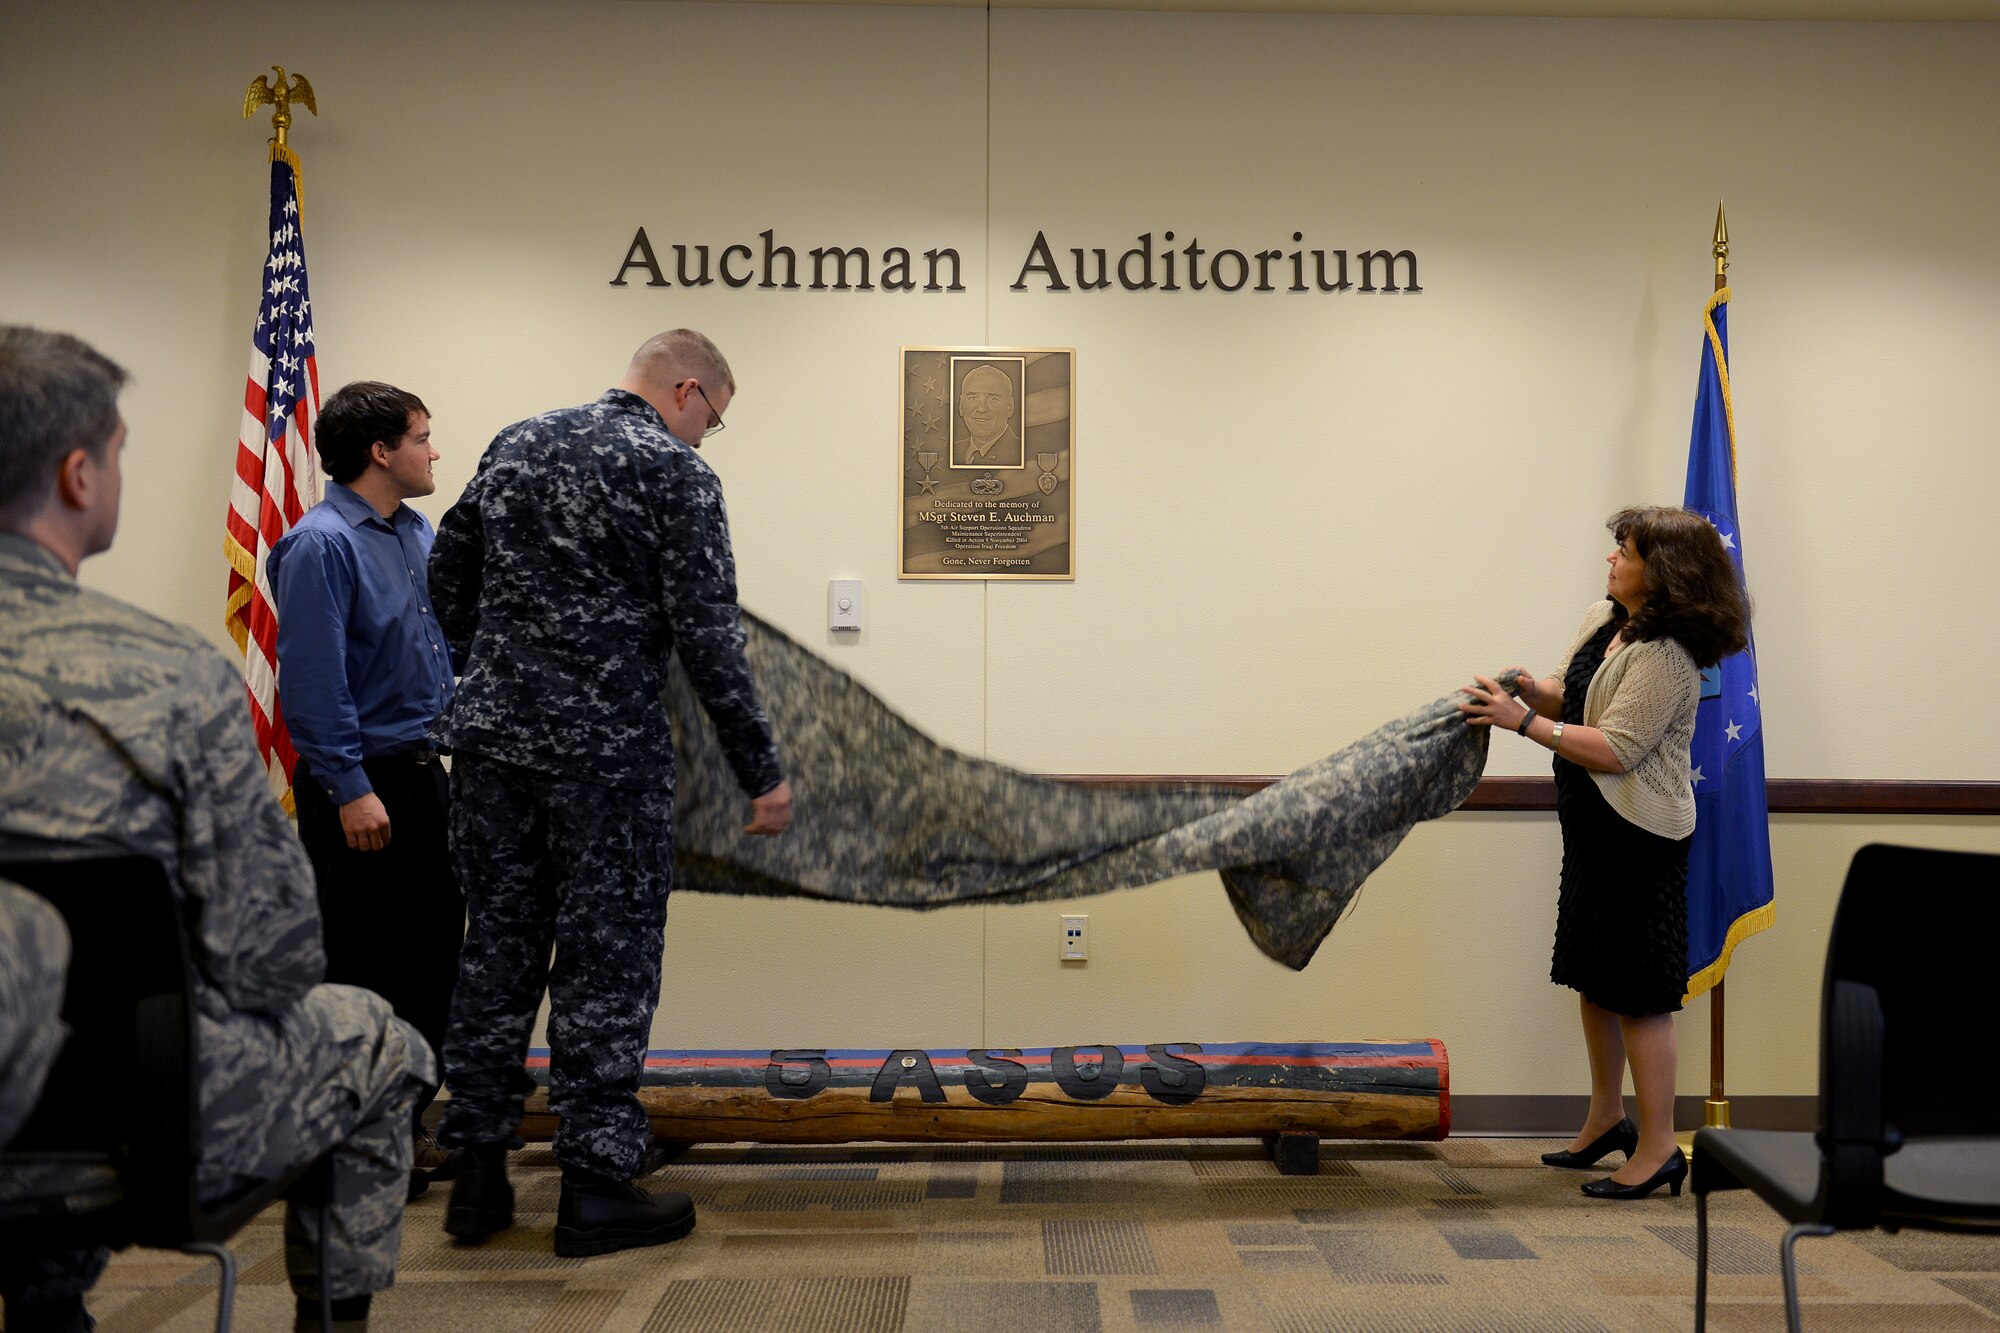 From left to right, Eric, Brian, and Jennifer Auchman, family members of Master Sgt. Steven Auchman, uncover a plaque, Nov. 21, 2014, during the Auchman Auditorium Dedication Ceremony at Joint Base Lewis-McChord Wash. After uncovering the plaque, Jennifer shared a few words with the 5th ASOS before concluding the ceremony. (U.S. Air Force photo/Airman 1st Class Keoni Chavarria)